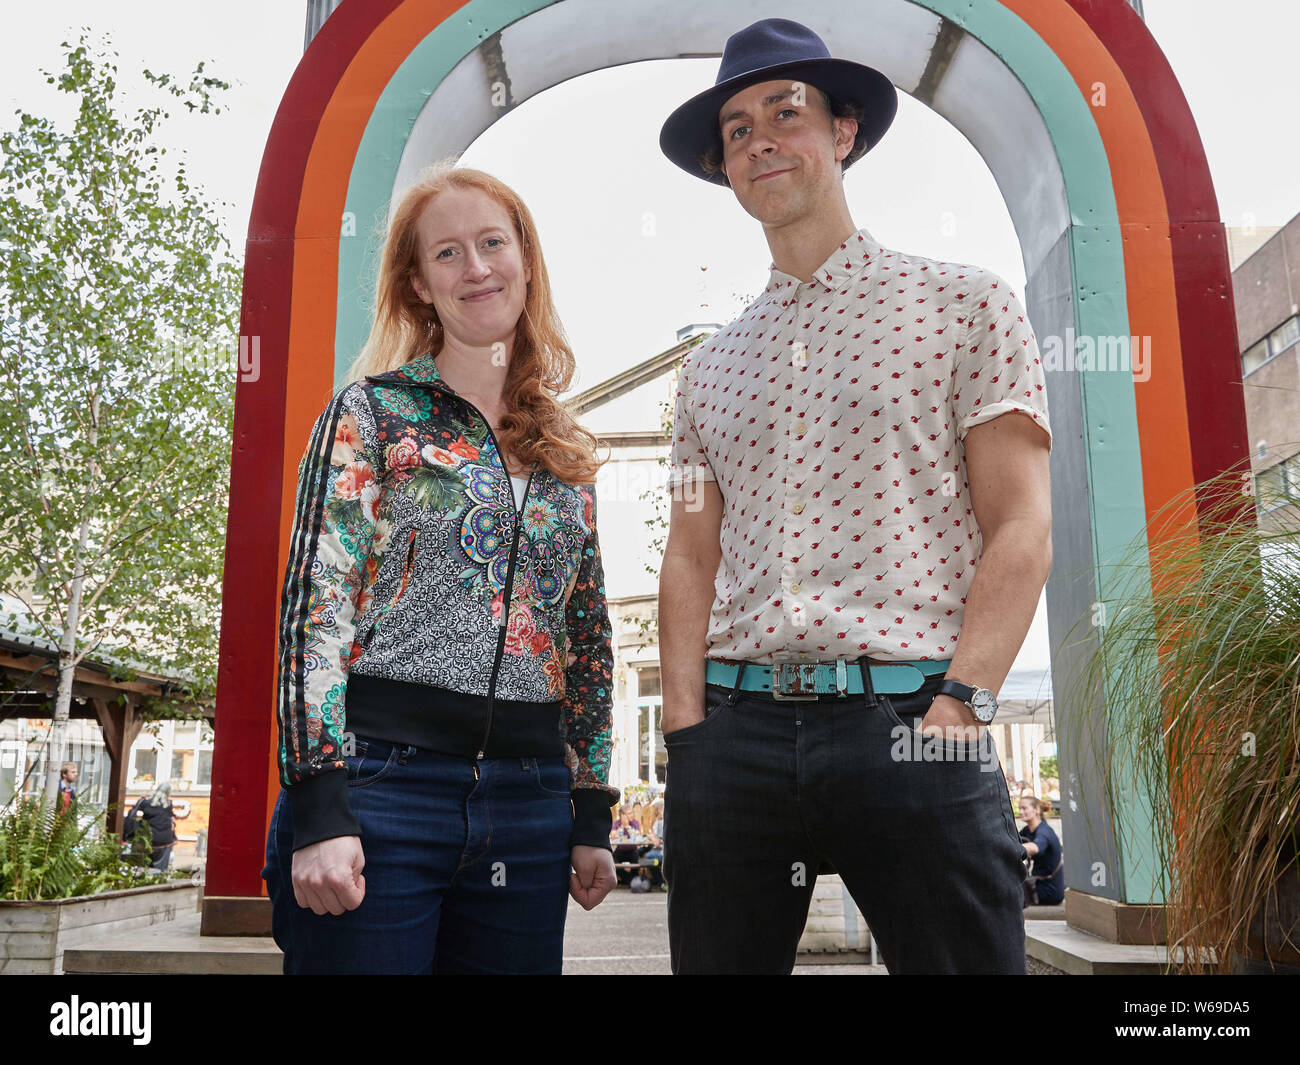 Edinburgh, Scotland. UK. 31 July 2019. Photo call with Paul Smith (Maximo  Park) and Annie Rigby At SummerHall Part of the Edinburgh Fringe Festival  2019. Pictured: Paul Smith and Annie Rigby. Credit: